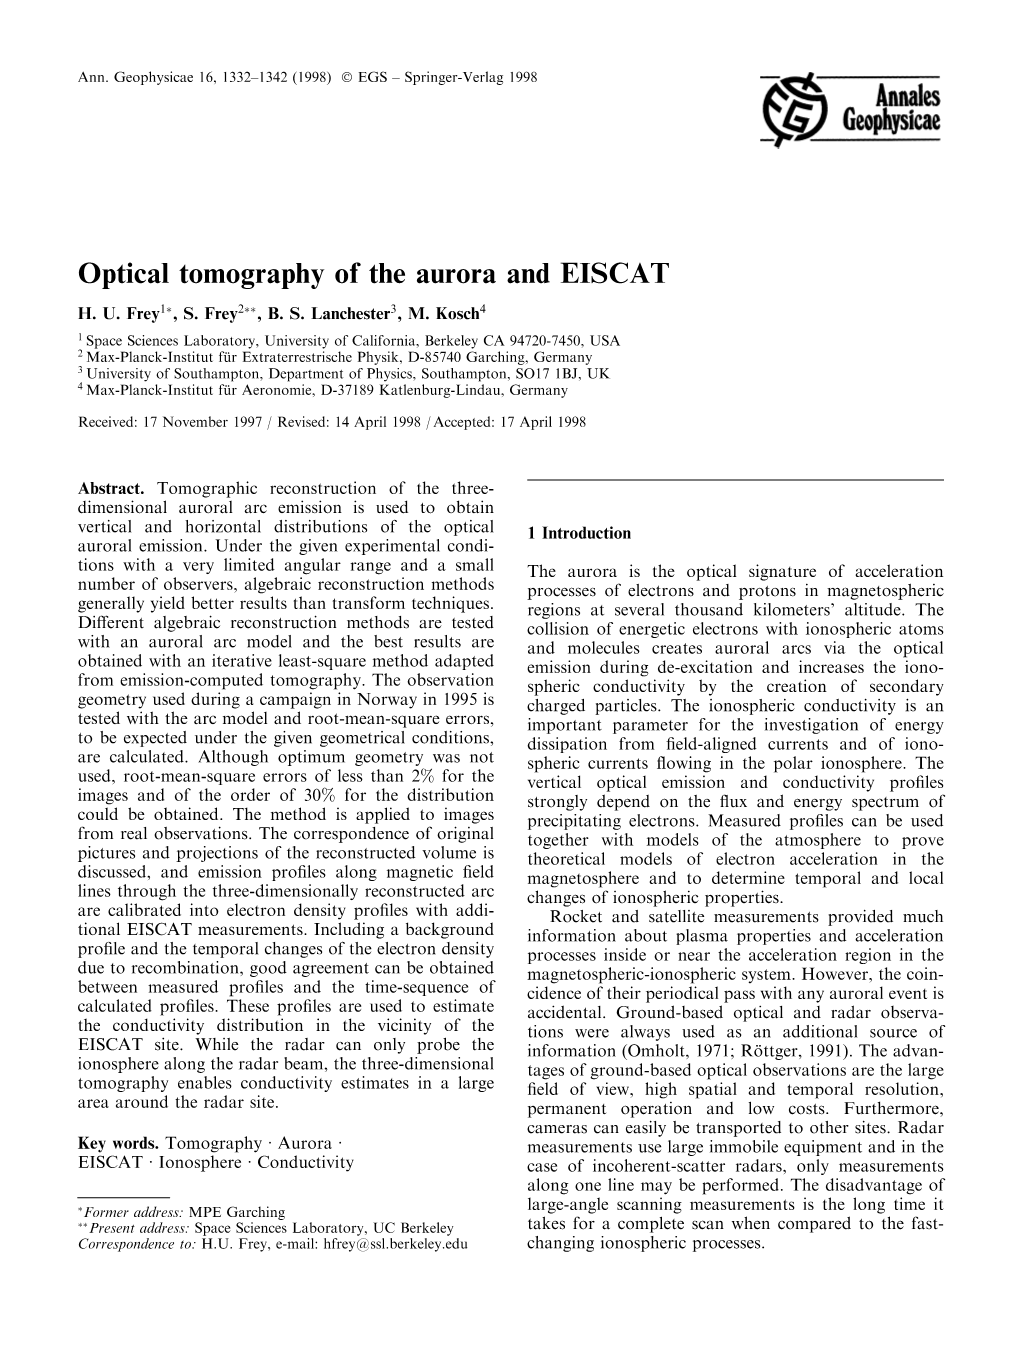 Optical Tomography of the Aurora and EISCAT